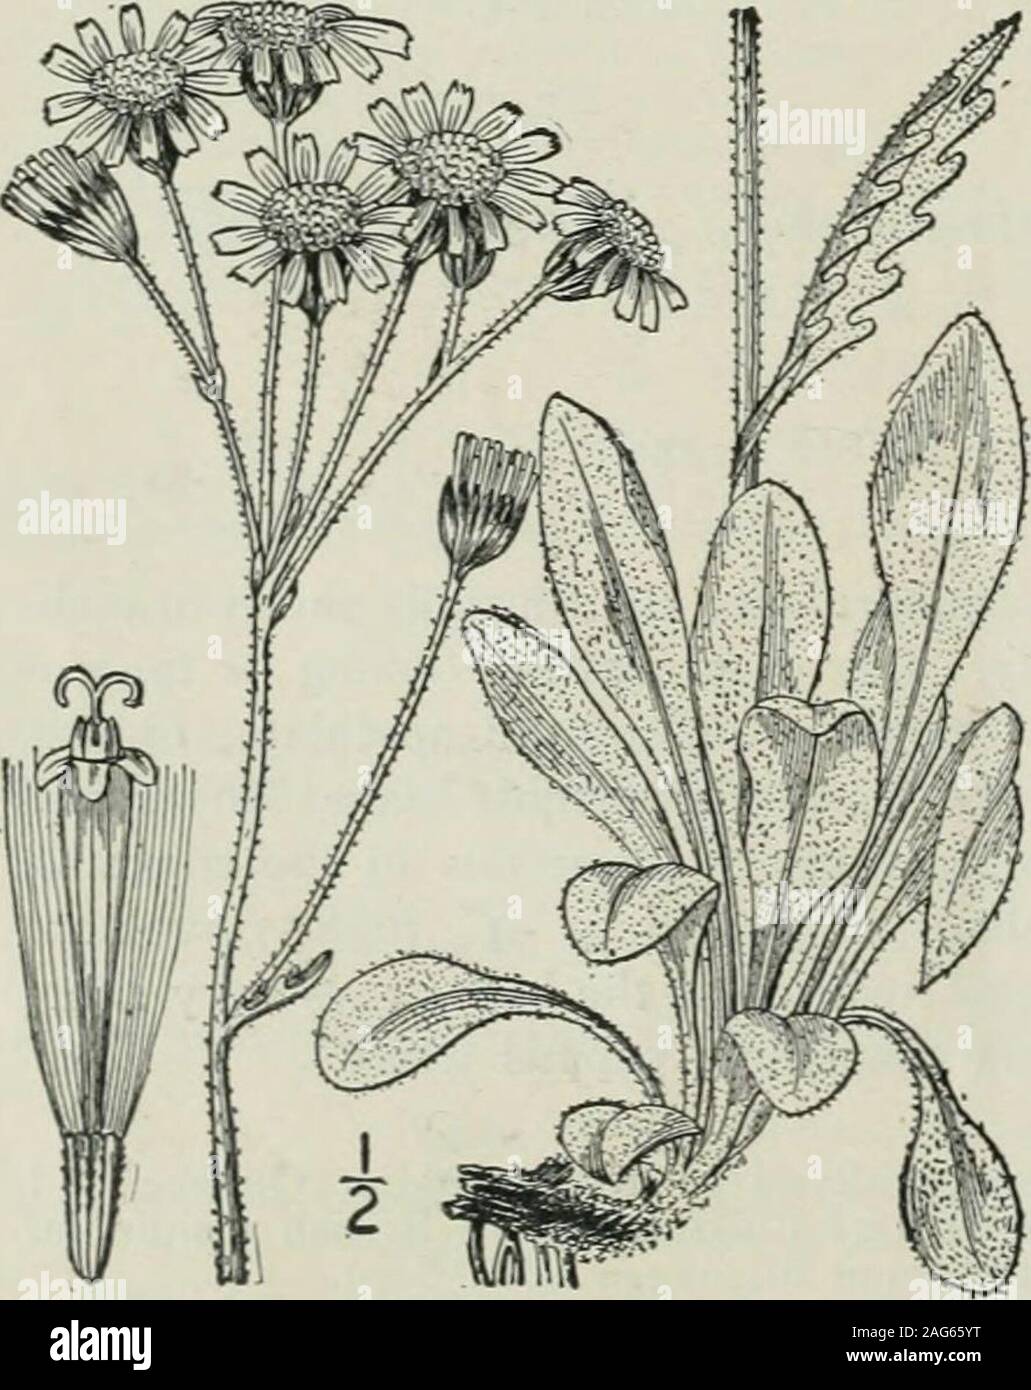 . An illustrated flora of the northern United States, Canada and the British possessions : from Newfoundland to the parallel of the southern boundary of Virginia and from the Atlantic Ocean westward to the 102nd meridian. Genus 102. THISTLE FAMILY. 541 6. Senecio spartioides T. & G. Broom-like Senecio. Fig. 4615. Senecio spartioides T. & G. Fl. N. A. 2 : 438. 1843. Woody at the base, usually branched, sometimesshrubby, glabrous or nearly so, leafy, i°-6° high.Leaves sessile, or the lowest petioled, Is long,linear, entire, or more or less serrate, not lobed;heads corymbose at the ends of the br Stock Photo